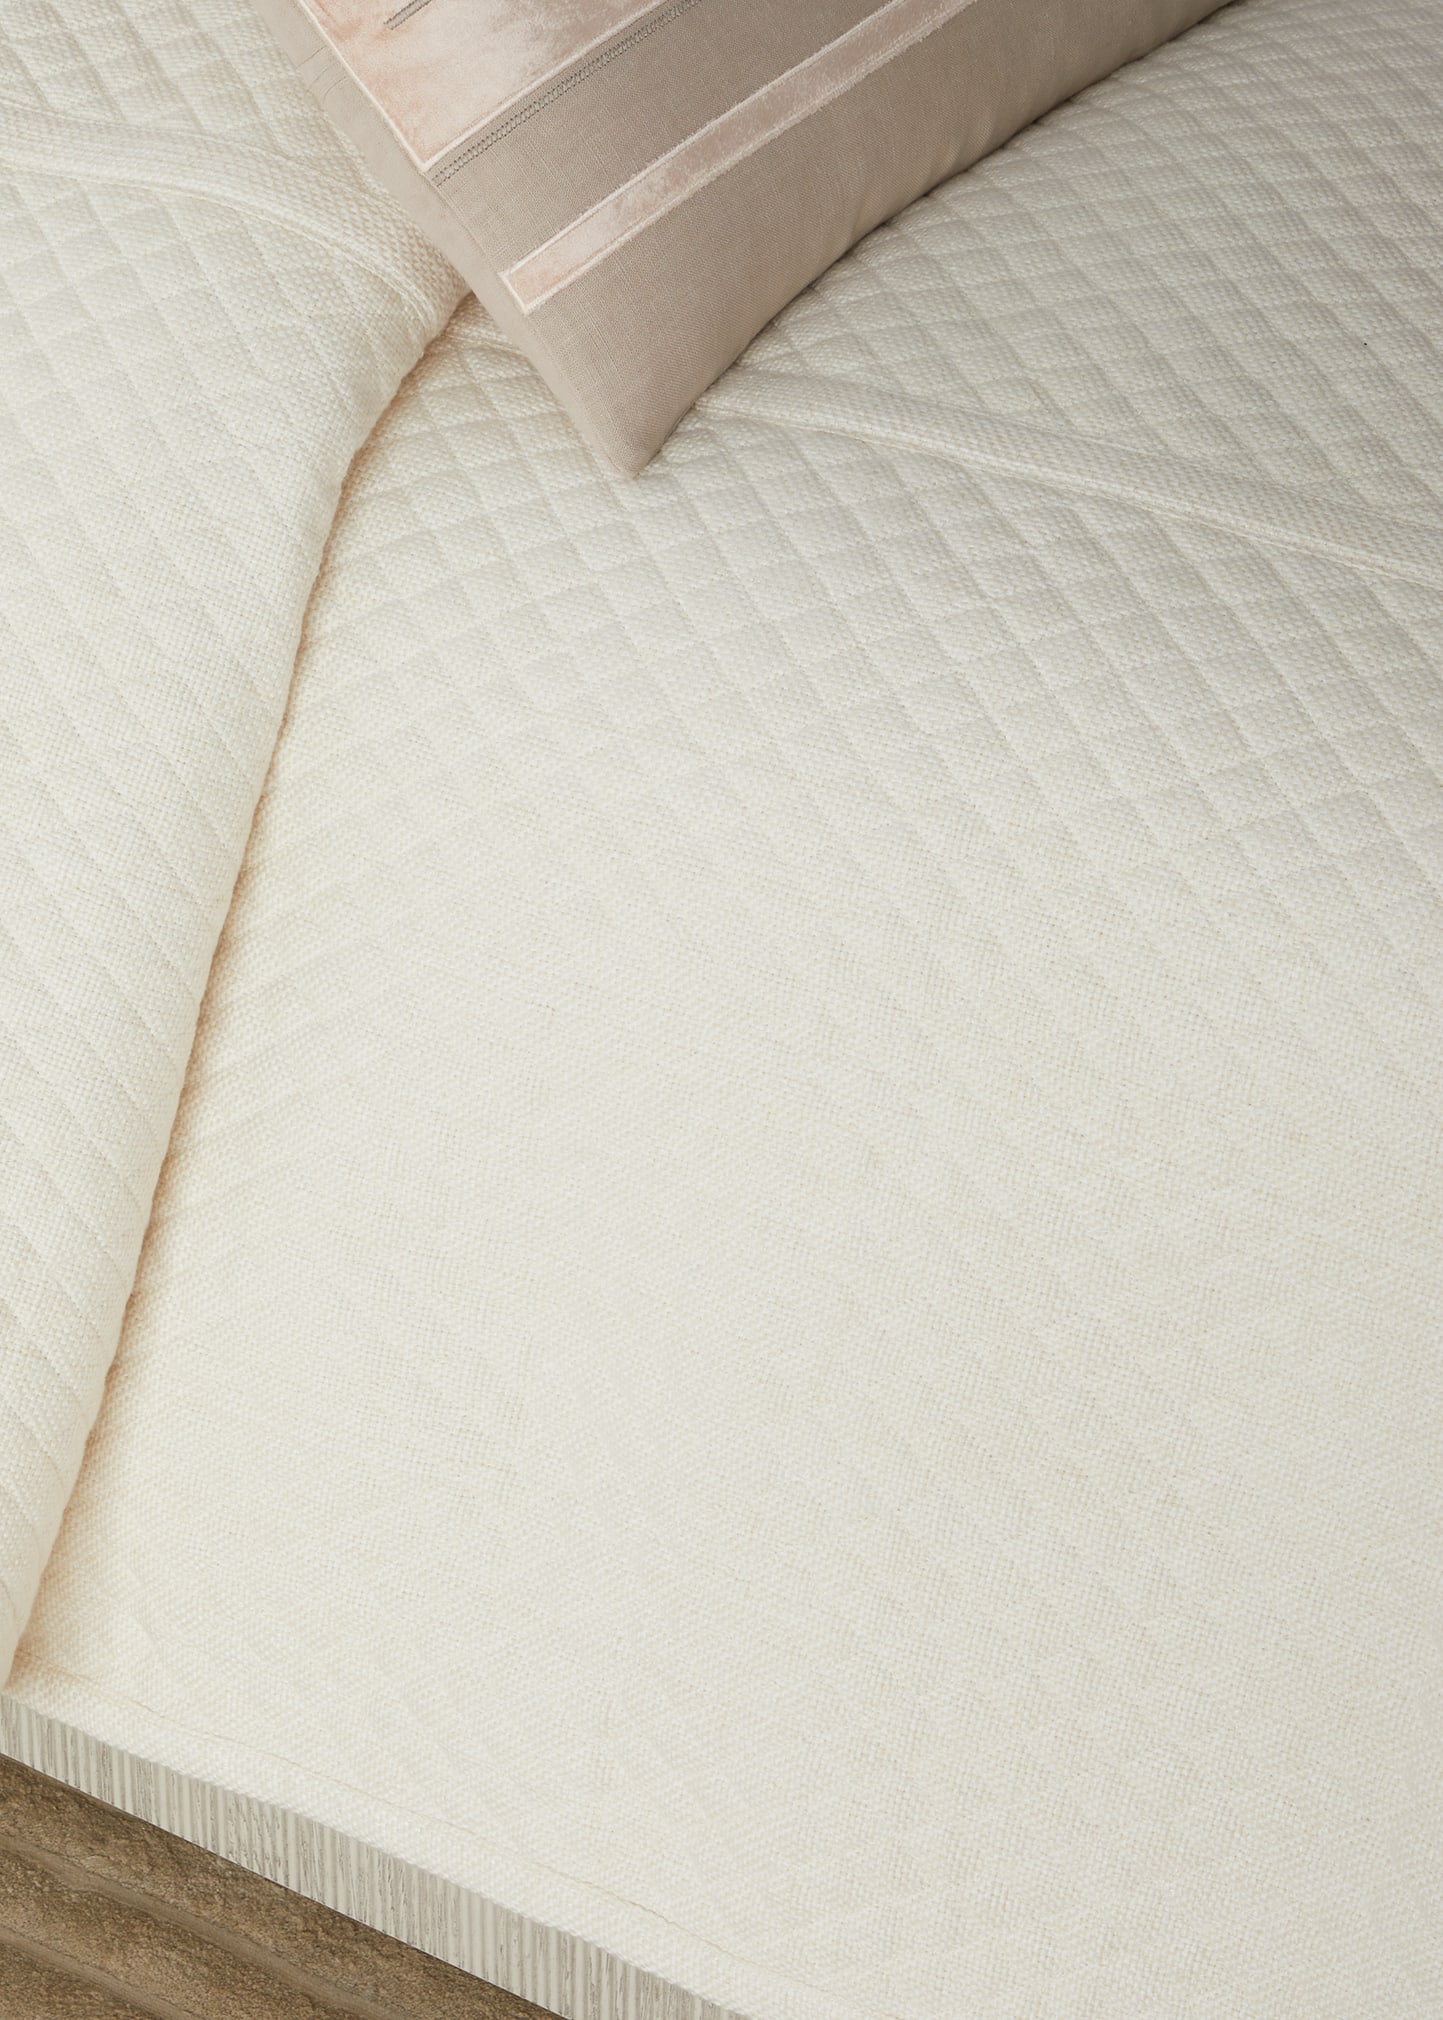 Cairo Diamond Quilted King Coverlet